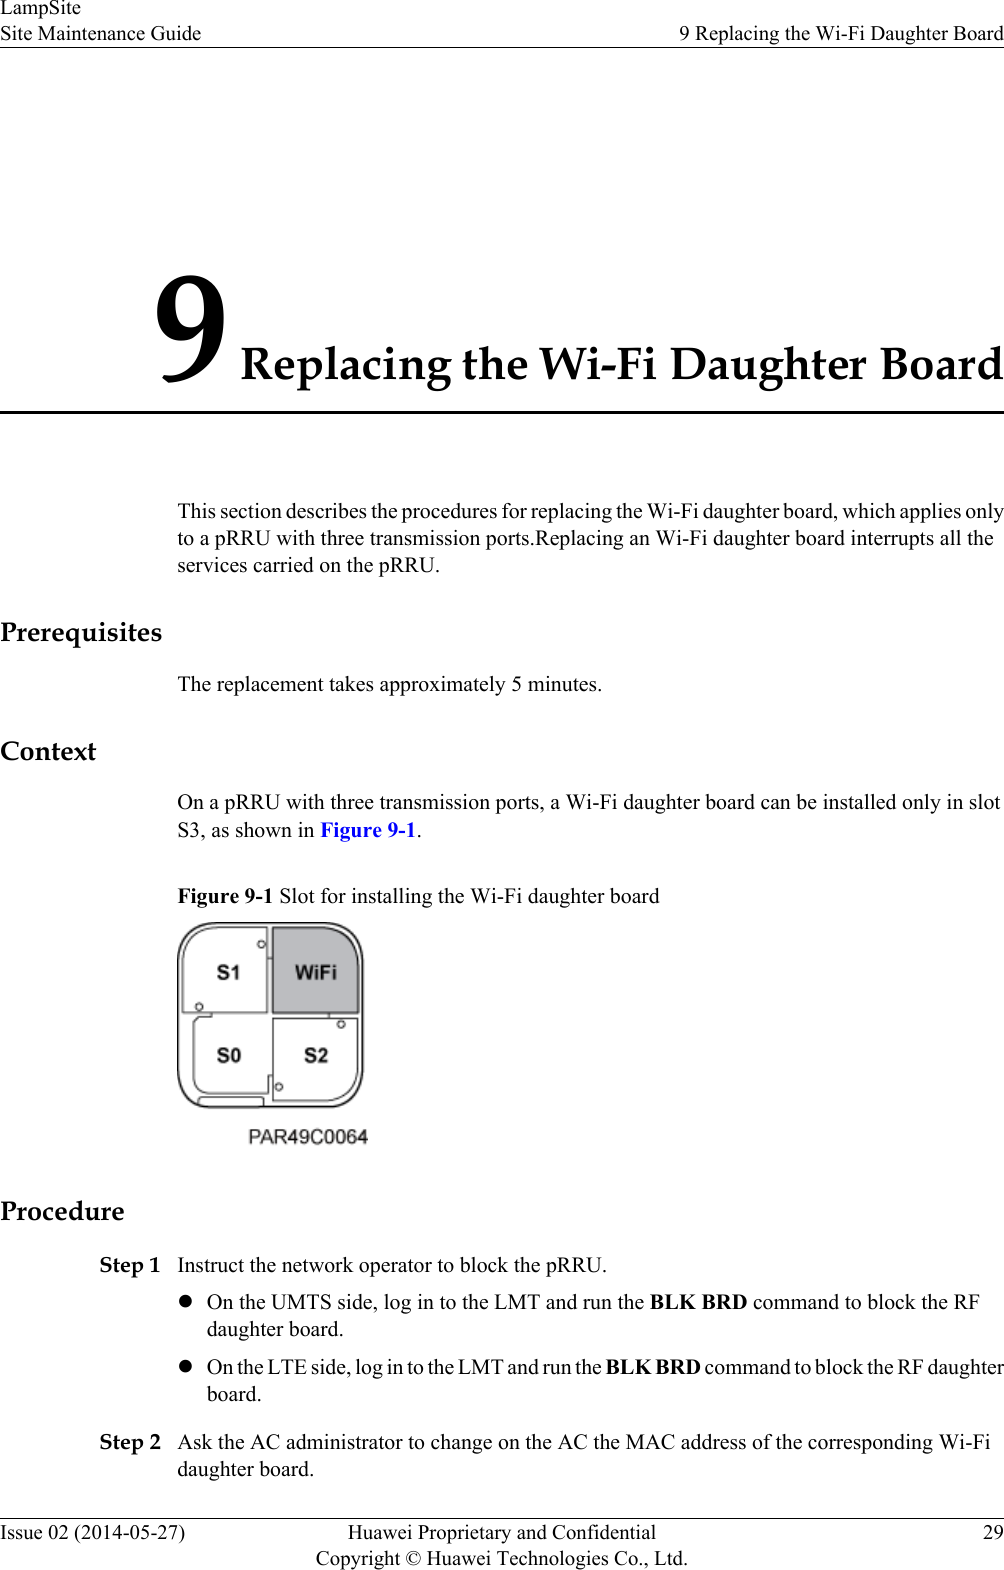 9 Replacing the Wi-Fi Daughter BoardThis section describes the procedures for replacing the Wi-Fi daughter board, which applies onlyto a pRRU with three transmission ports.Replacing an Wi-Fi daughter board interrupts all theservices carried on the pRRU.PrerequisitesThe replacement takes approximately 5 minutes.ContextOn a pRRU with three transmission ports, a Wi-Fi daughter board can be installed only in slotS3, as shown in Figure 9-1.Figure 9-1 Slot for installing the Wi-Fi daughter boardProcedureStep 1 Instruct the network operator to block the pRRU.lOn the UMTS side, log in to the LMT and run the BLK BRD command to block the RFdaughter board.lOn the LTE side, log in to the LMT and run the BLK BRD command to block the RF daughterboard.Step 2 Ask the AC administrator to change on the AC the MAC address of the corresponding Wi-Fidaughter board.LampSiteSite Maintenance Guide 9 Replacing the Wi-Fi Daughter BoardIssue 02 (2014-05-27) Huawei Proprietary and ConfidentialCopyright © Huawei Technologies Co., Ltd.29